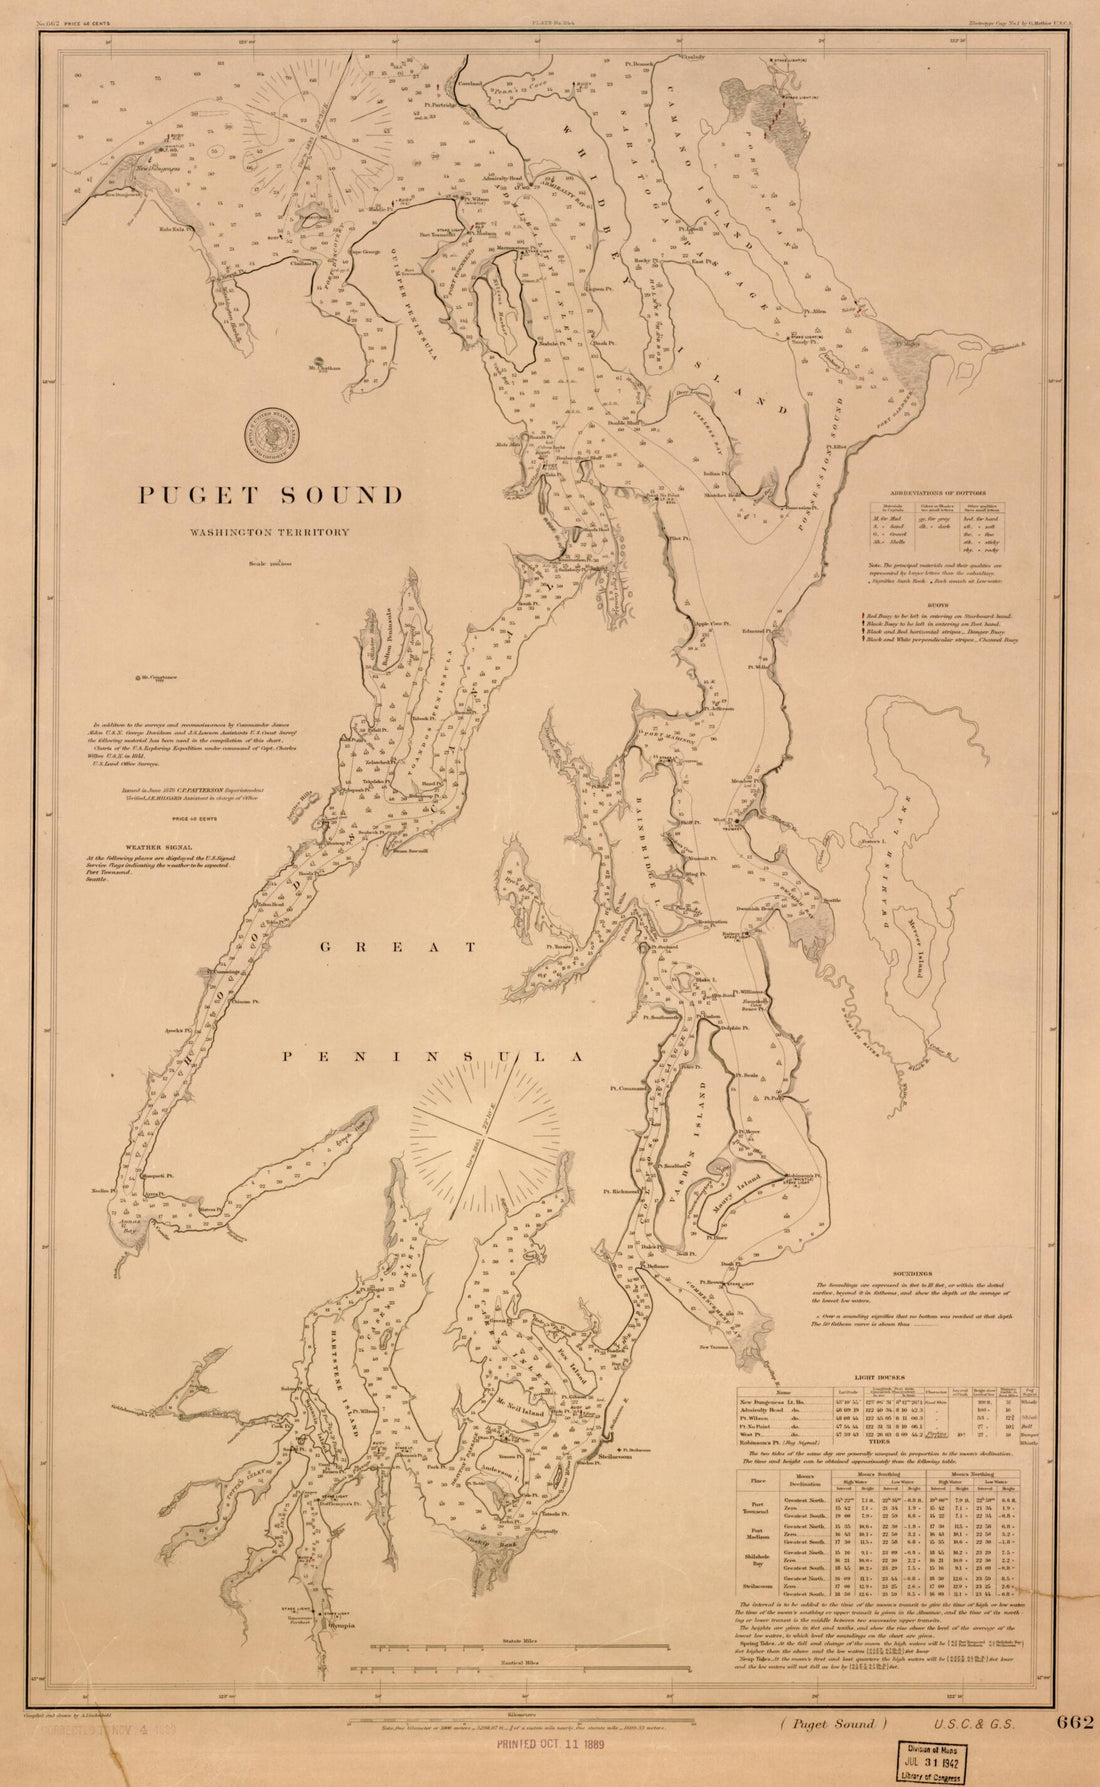 This old map of Puget Sound, Washington Territory from 1889 was created by A. Lindenkohl,  U.S. Coast and Geodetic Survey in 1889